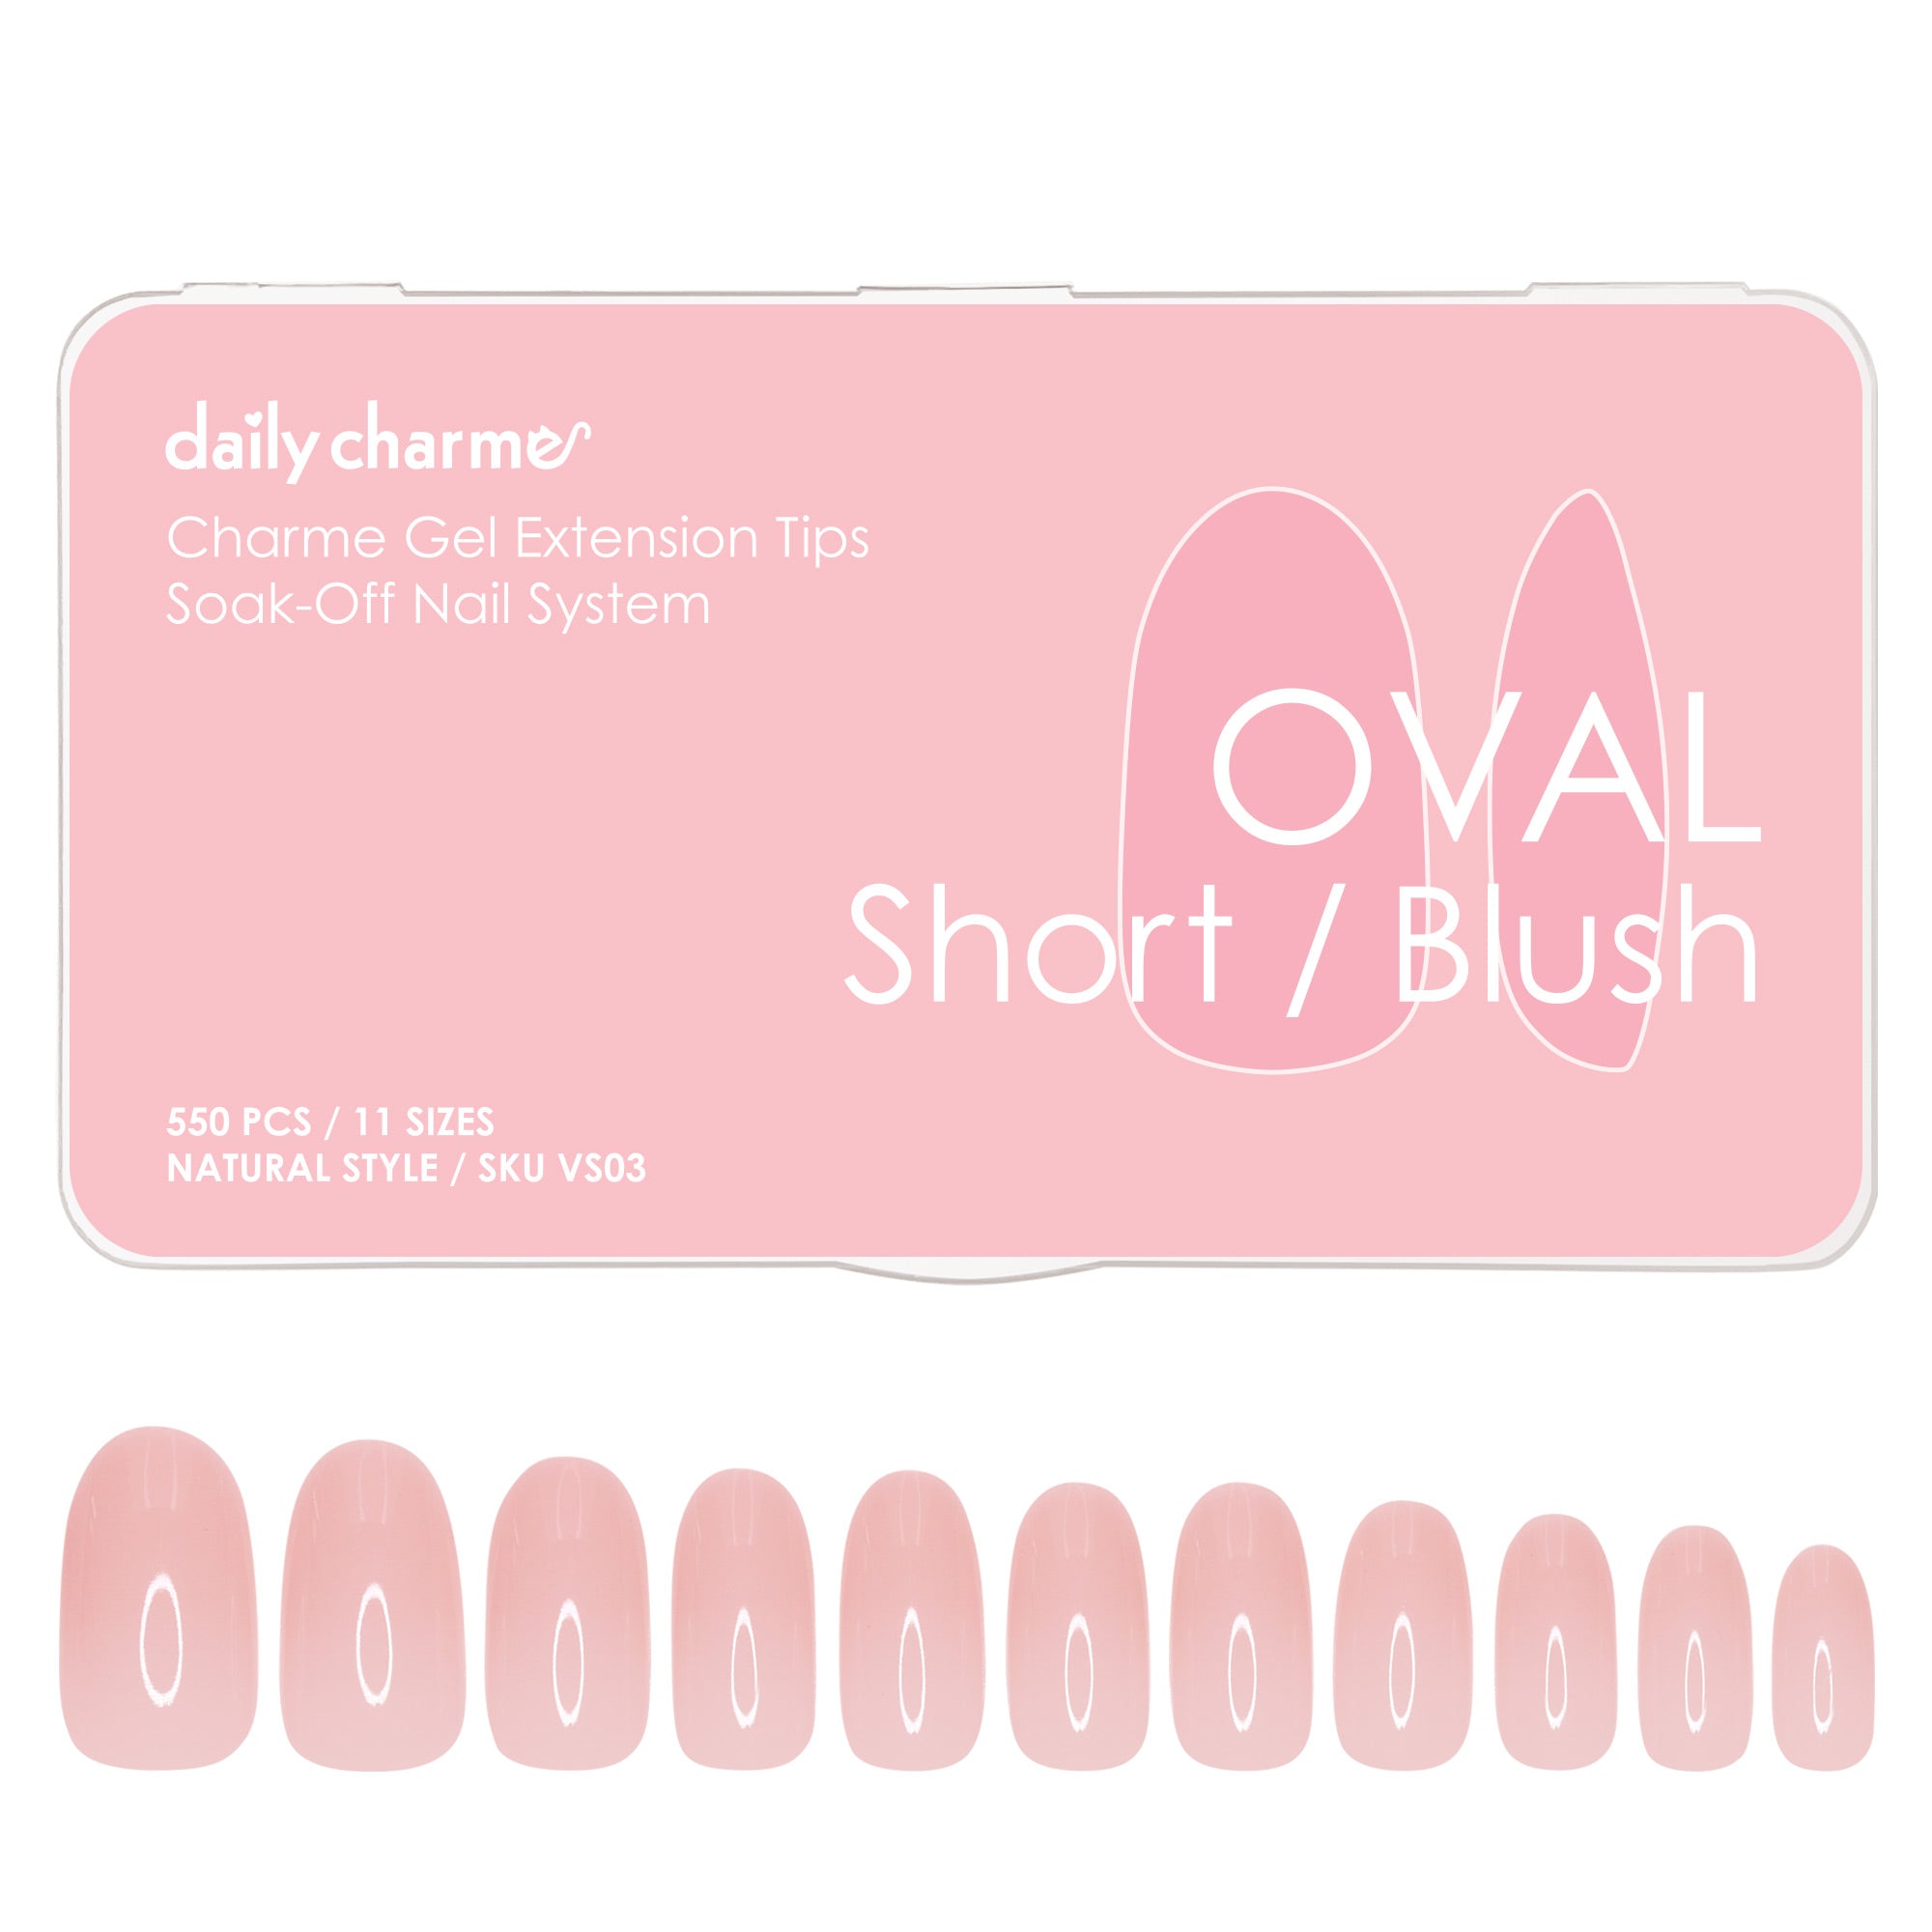 Charme Gel Extension Tips / Oval / Short / Blush Pink Nails